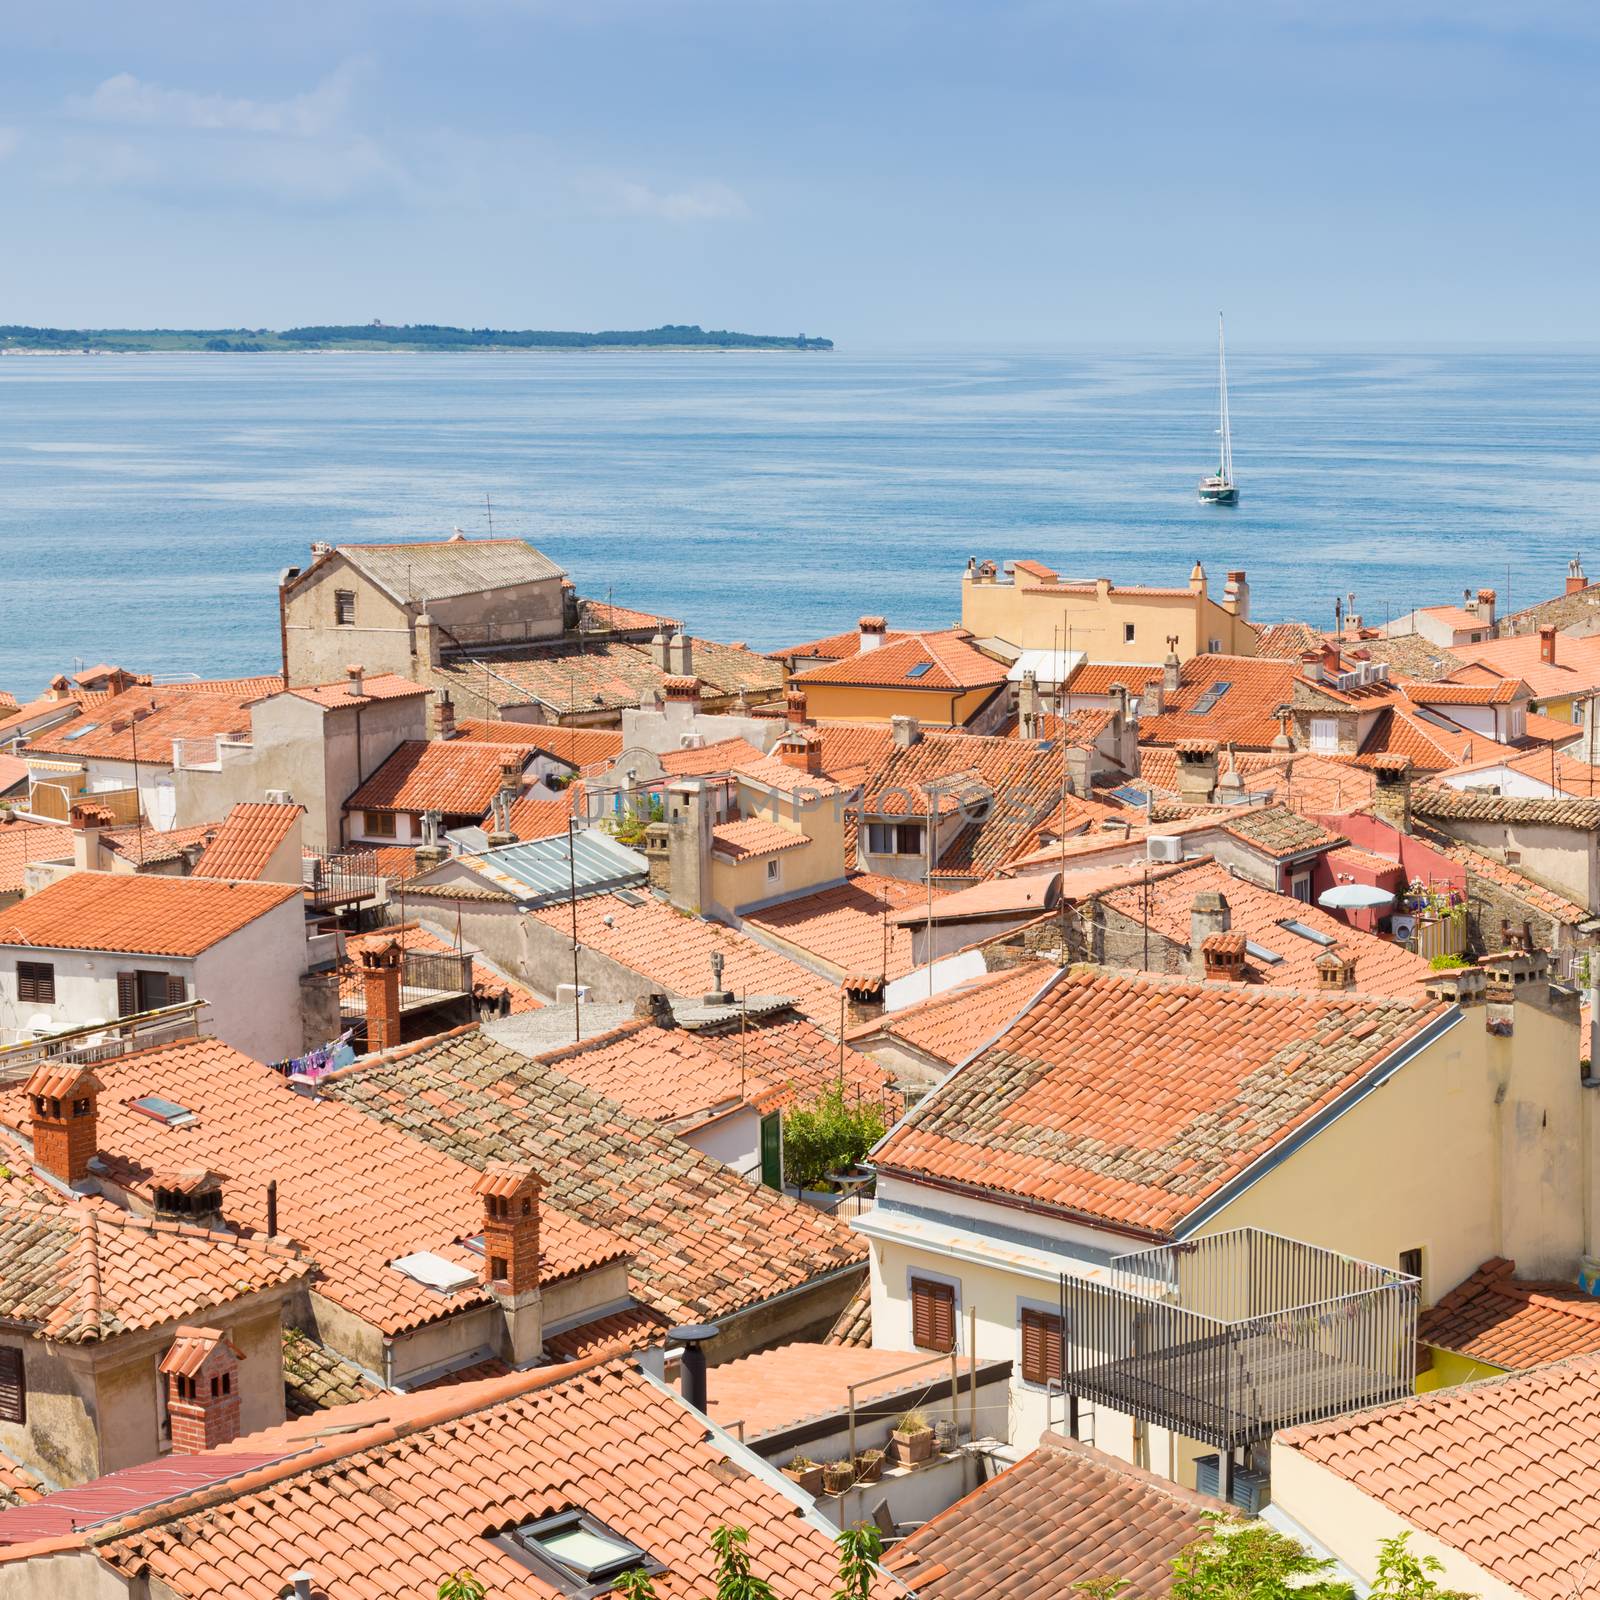 Picturesque old town Piran, Slovenia. by kasto